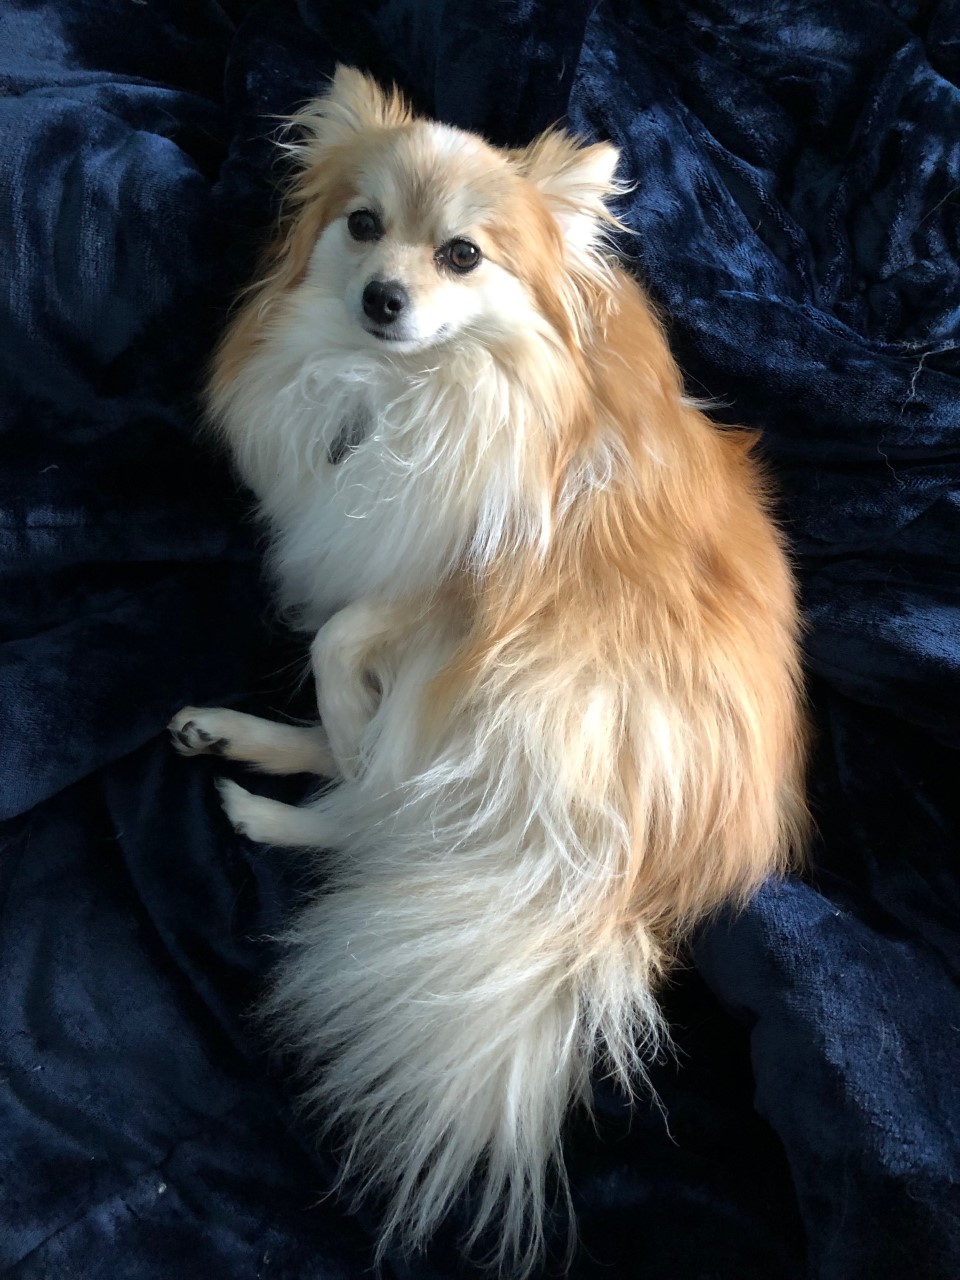 A gold and white Pomeranian laying on a blue blanket.